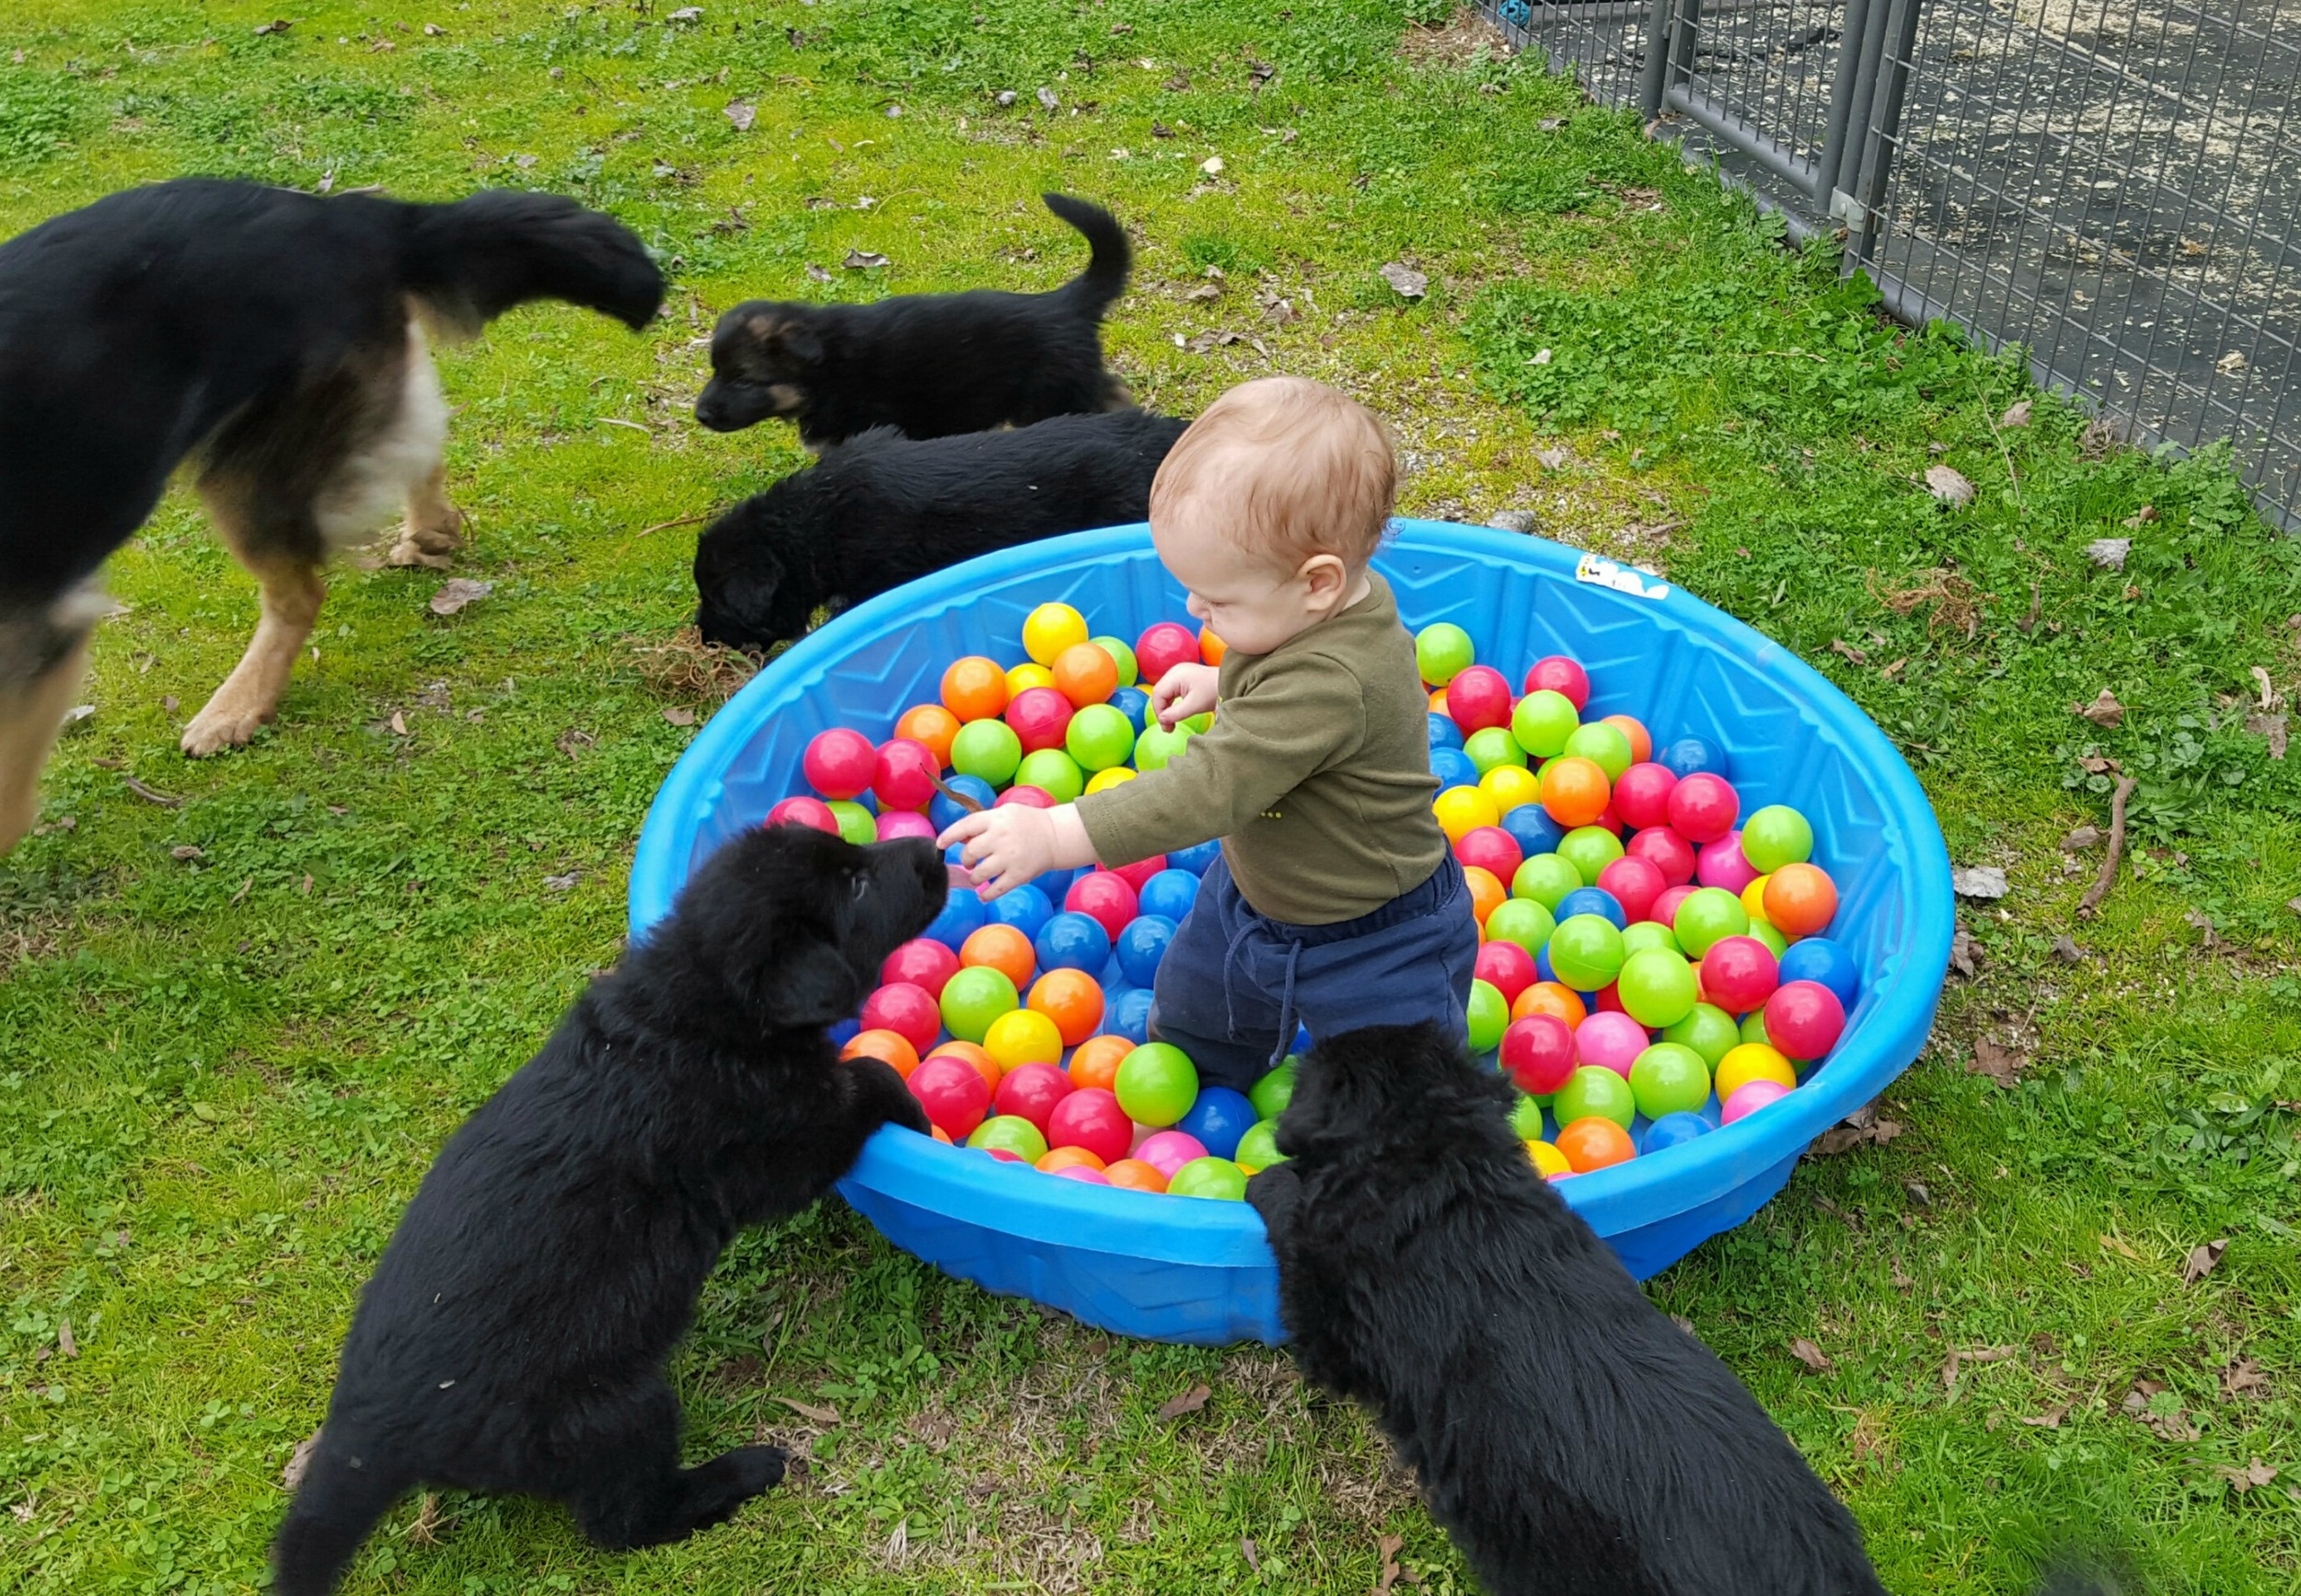 The pool with balls instead of bottles...and a baby :)